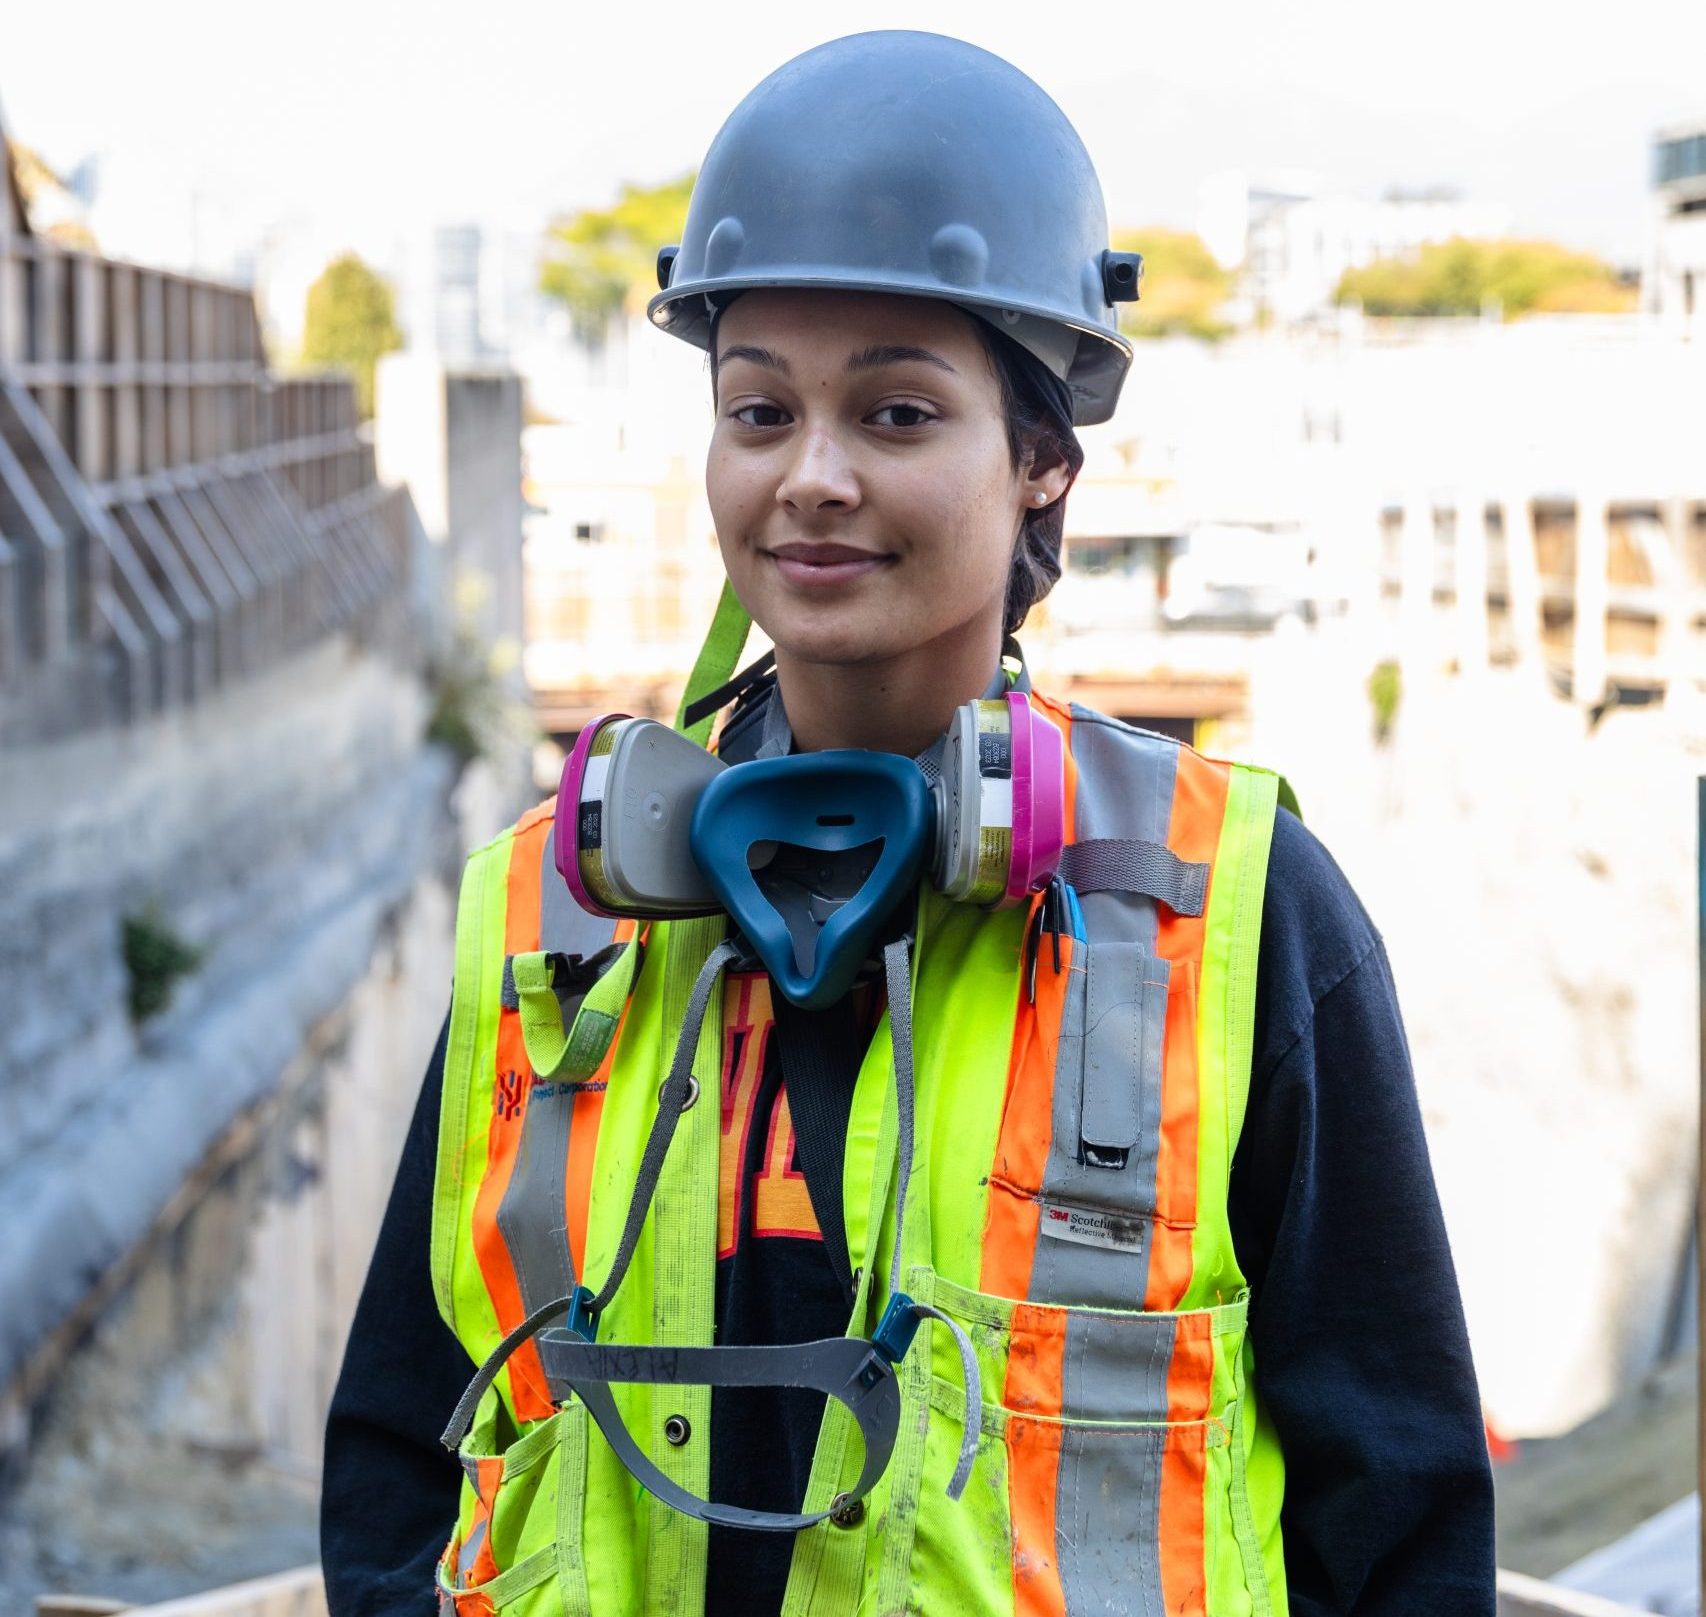 A picture of a worker named Alexia smiling